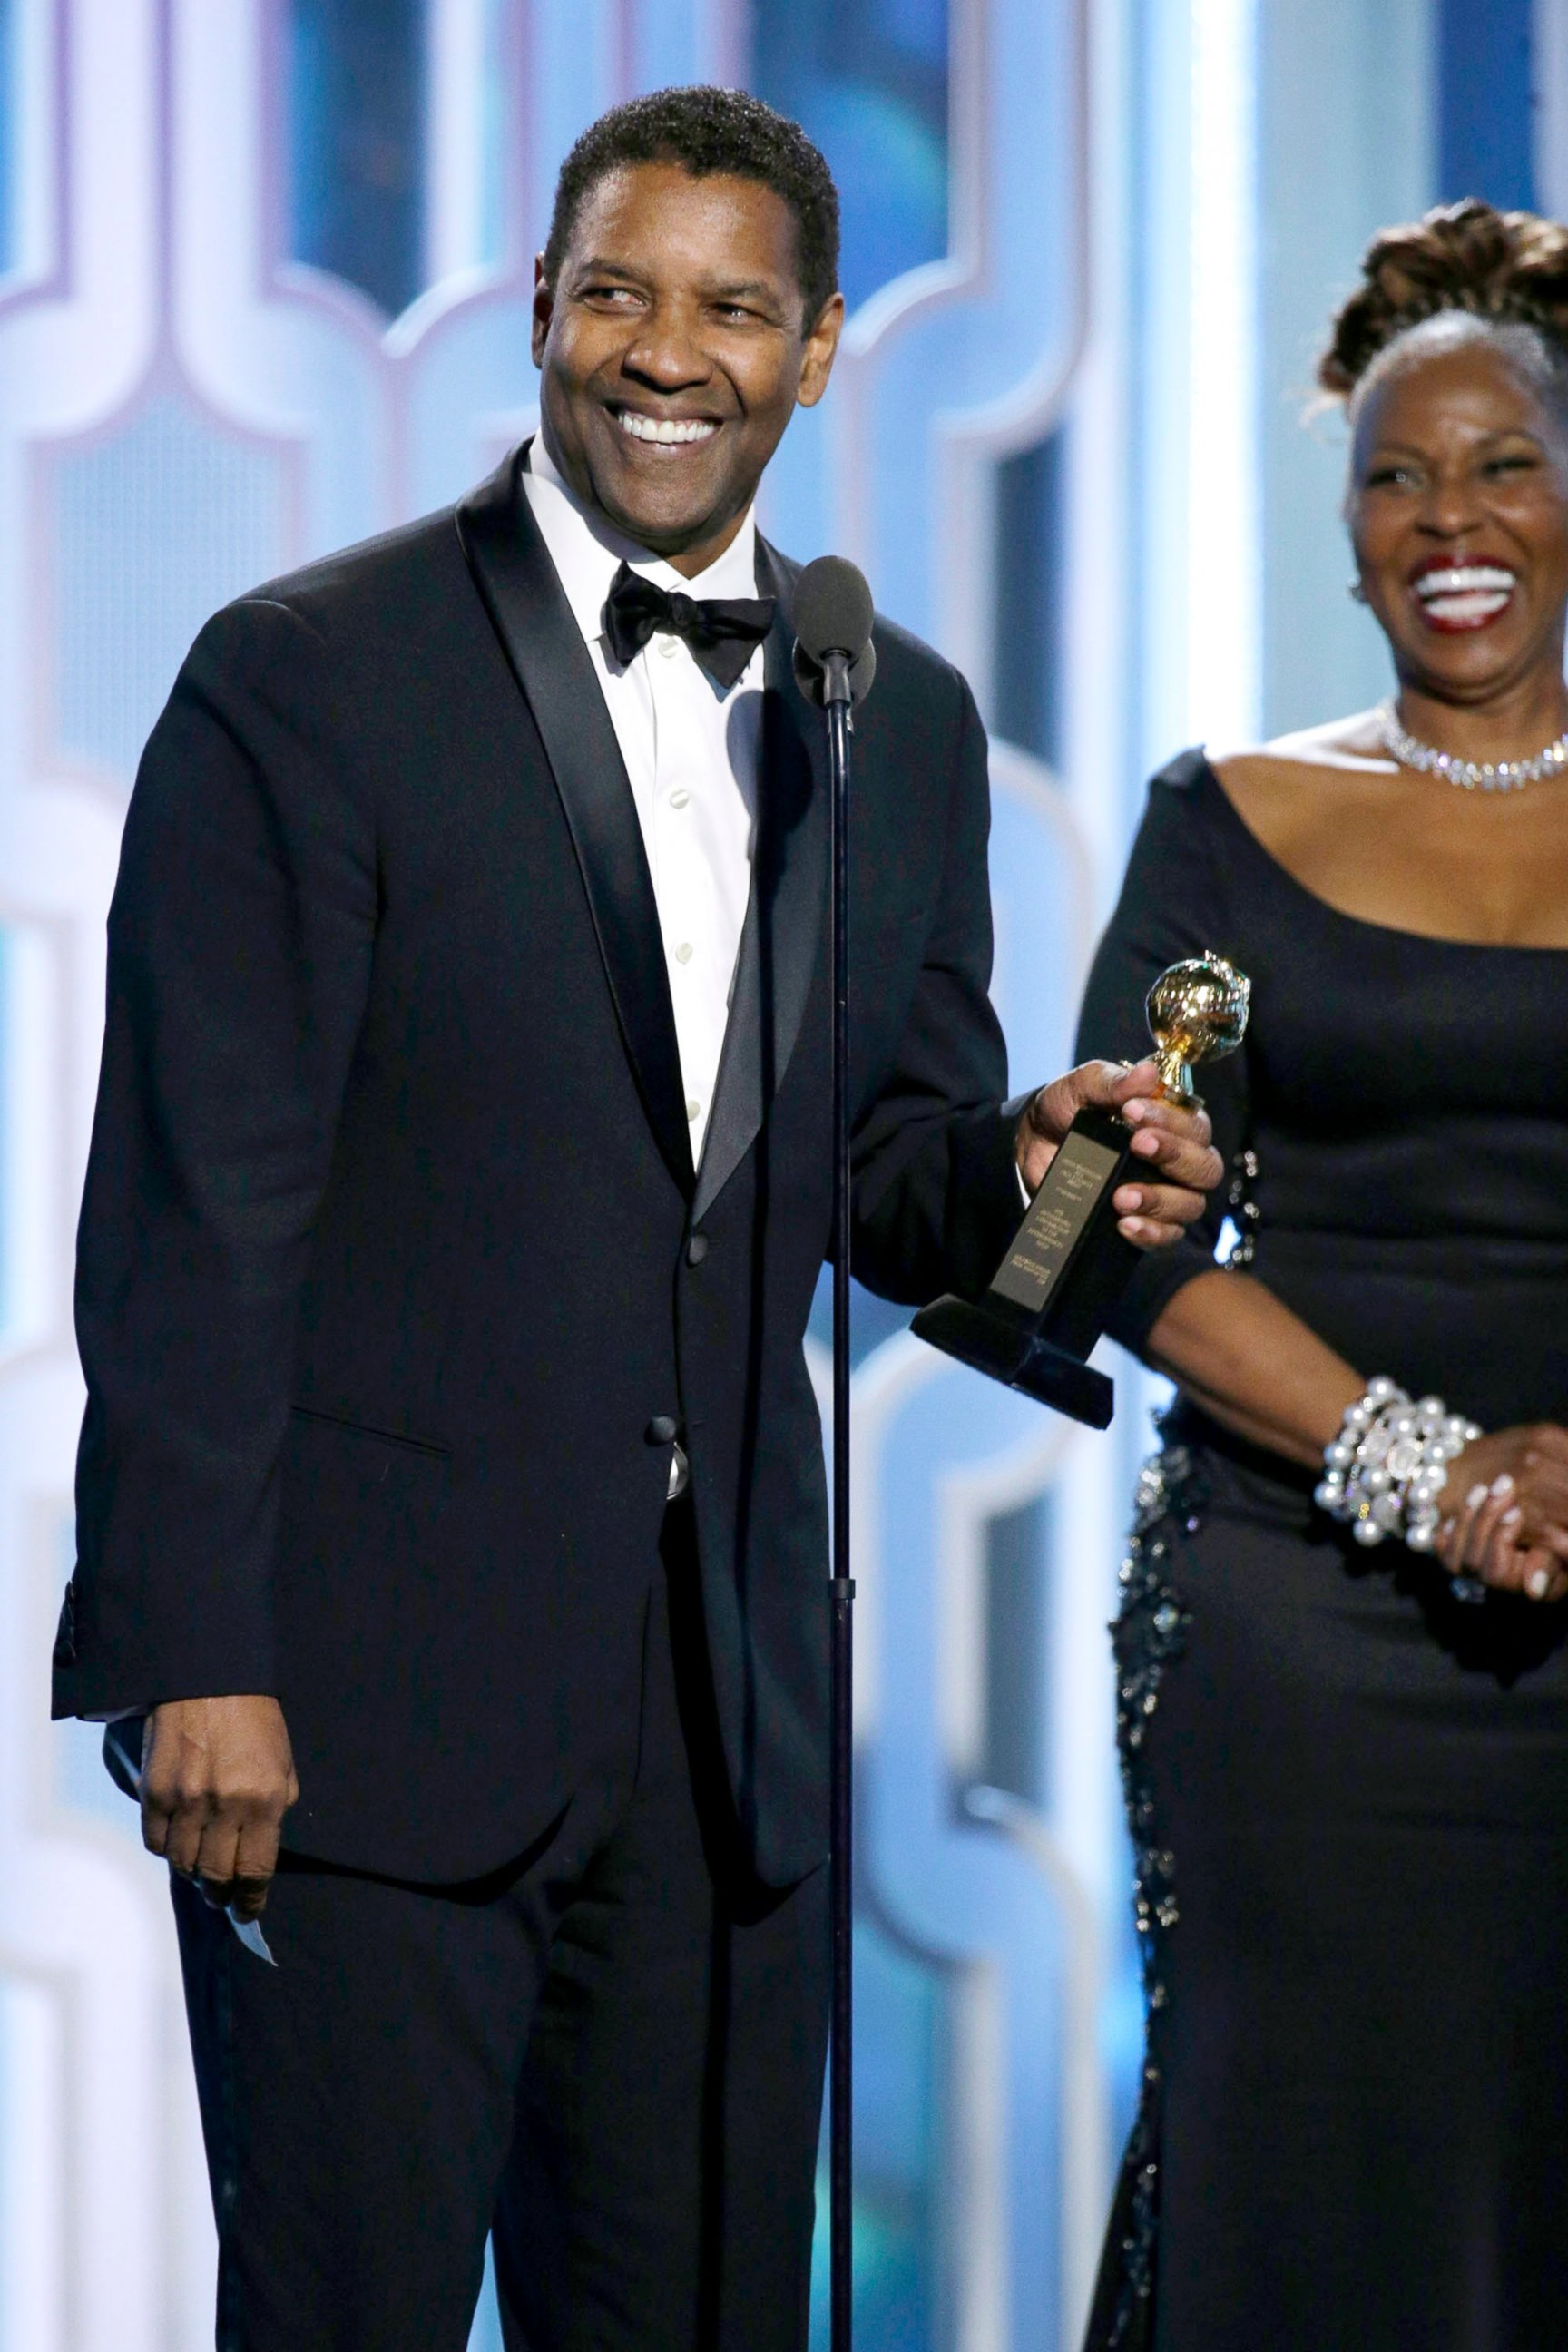 PHOTO: Denzel Washington during the 73rd Annual Golden Globe Awards at The Beverly Hilton Hotel on Jan. 10, 2016 in Beverly Hills, Calif.